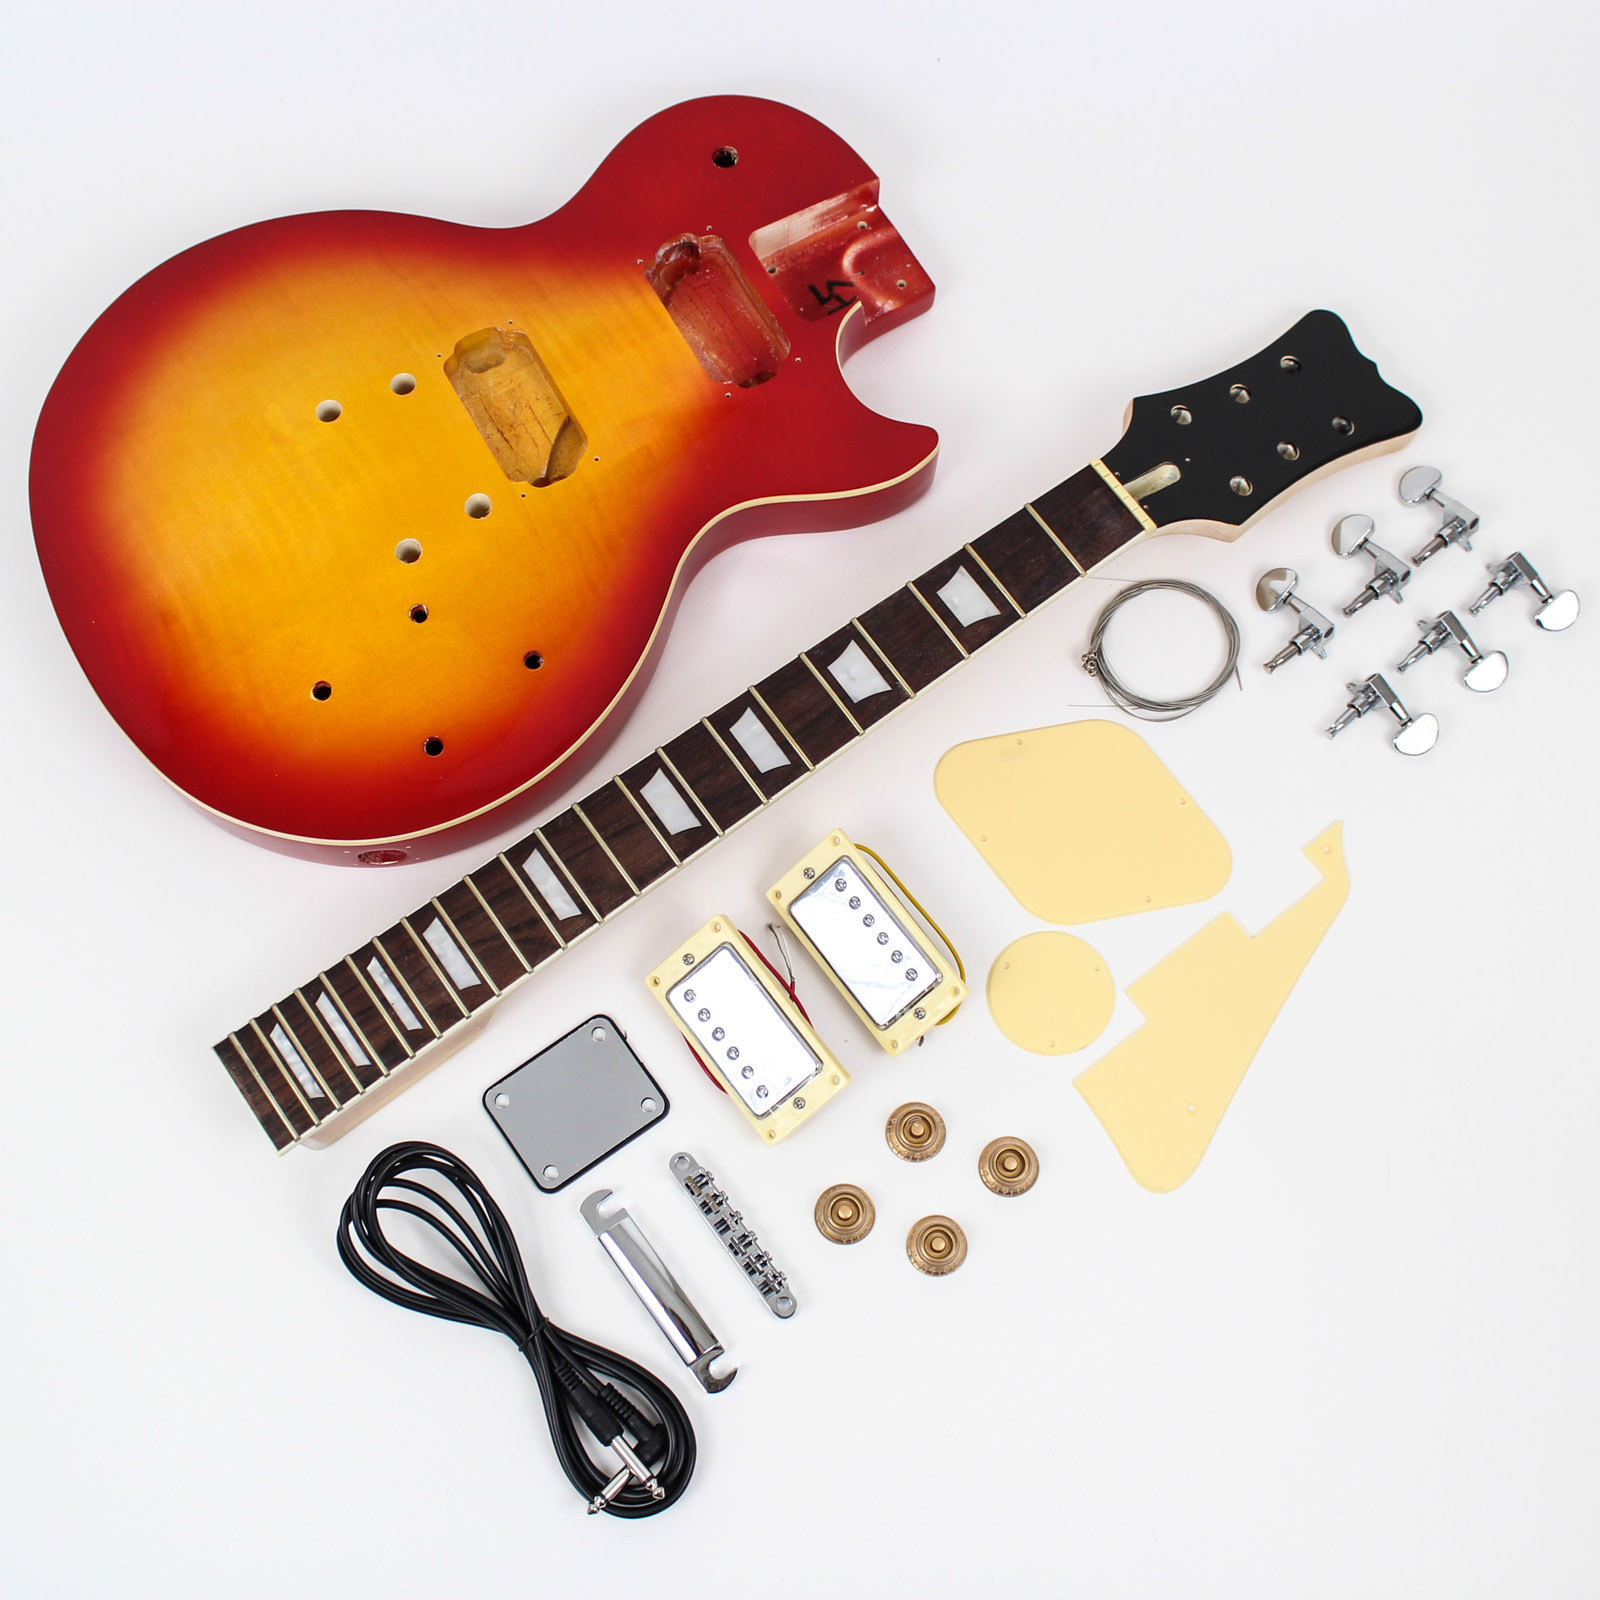 Best 23 Diy Les Paul Kit – Home, Family, Style and Art Ideas